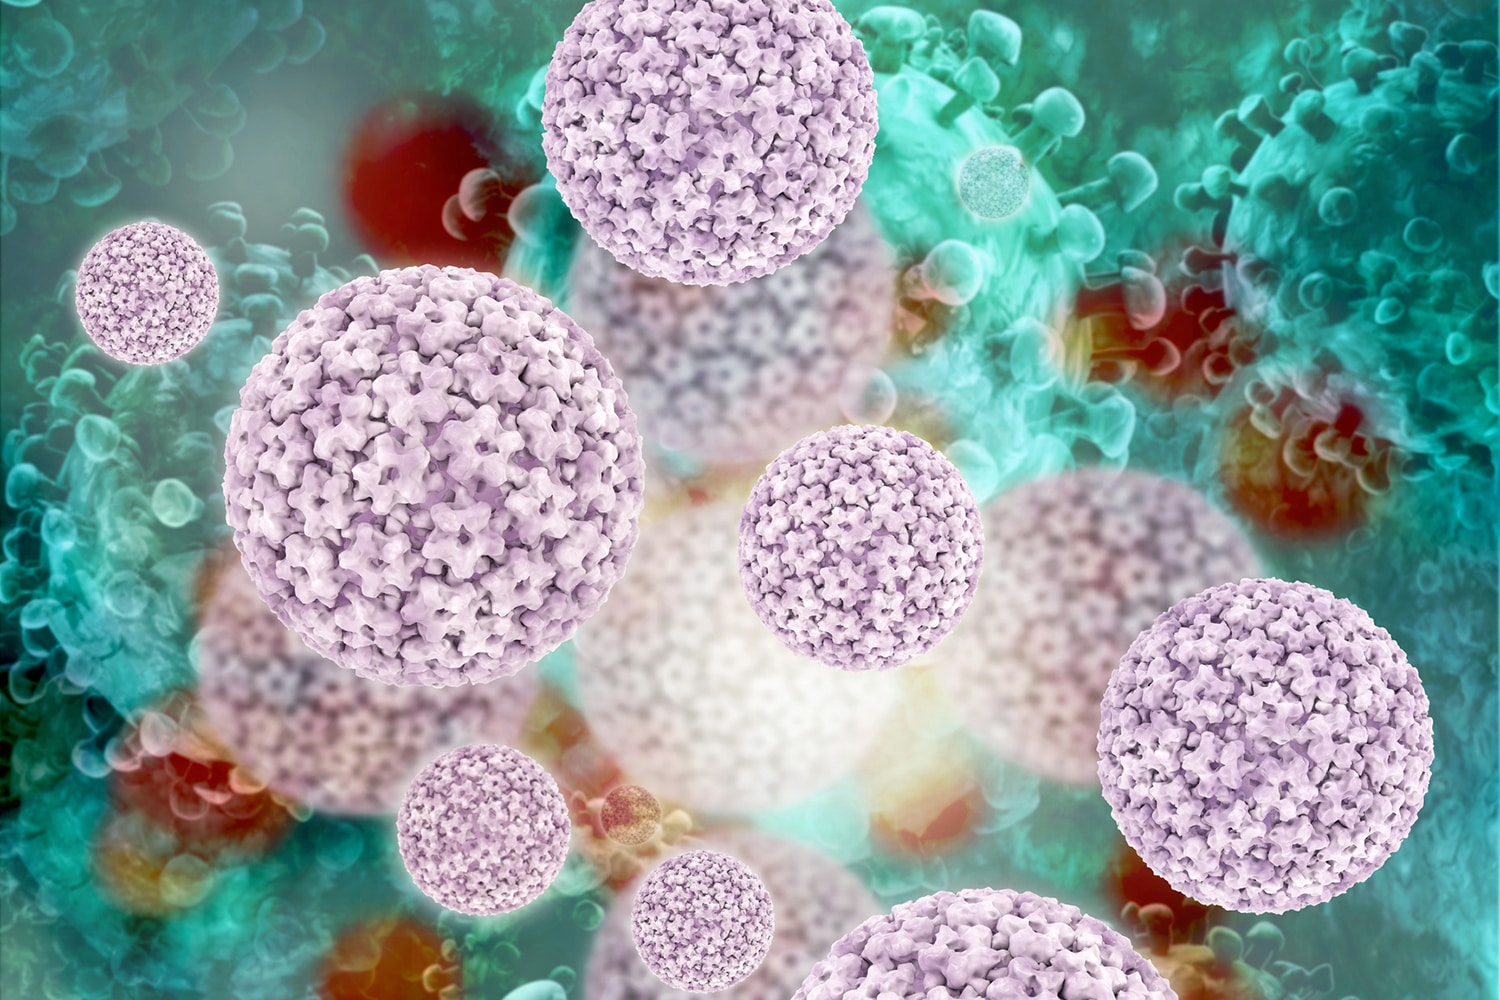 Push Needed to Increase HPV Vaccination Rates